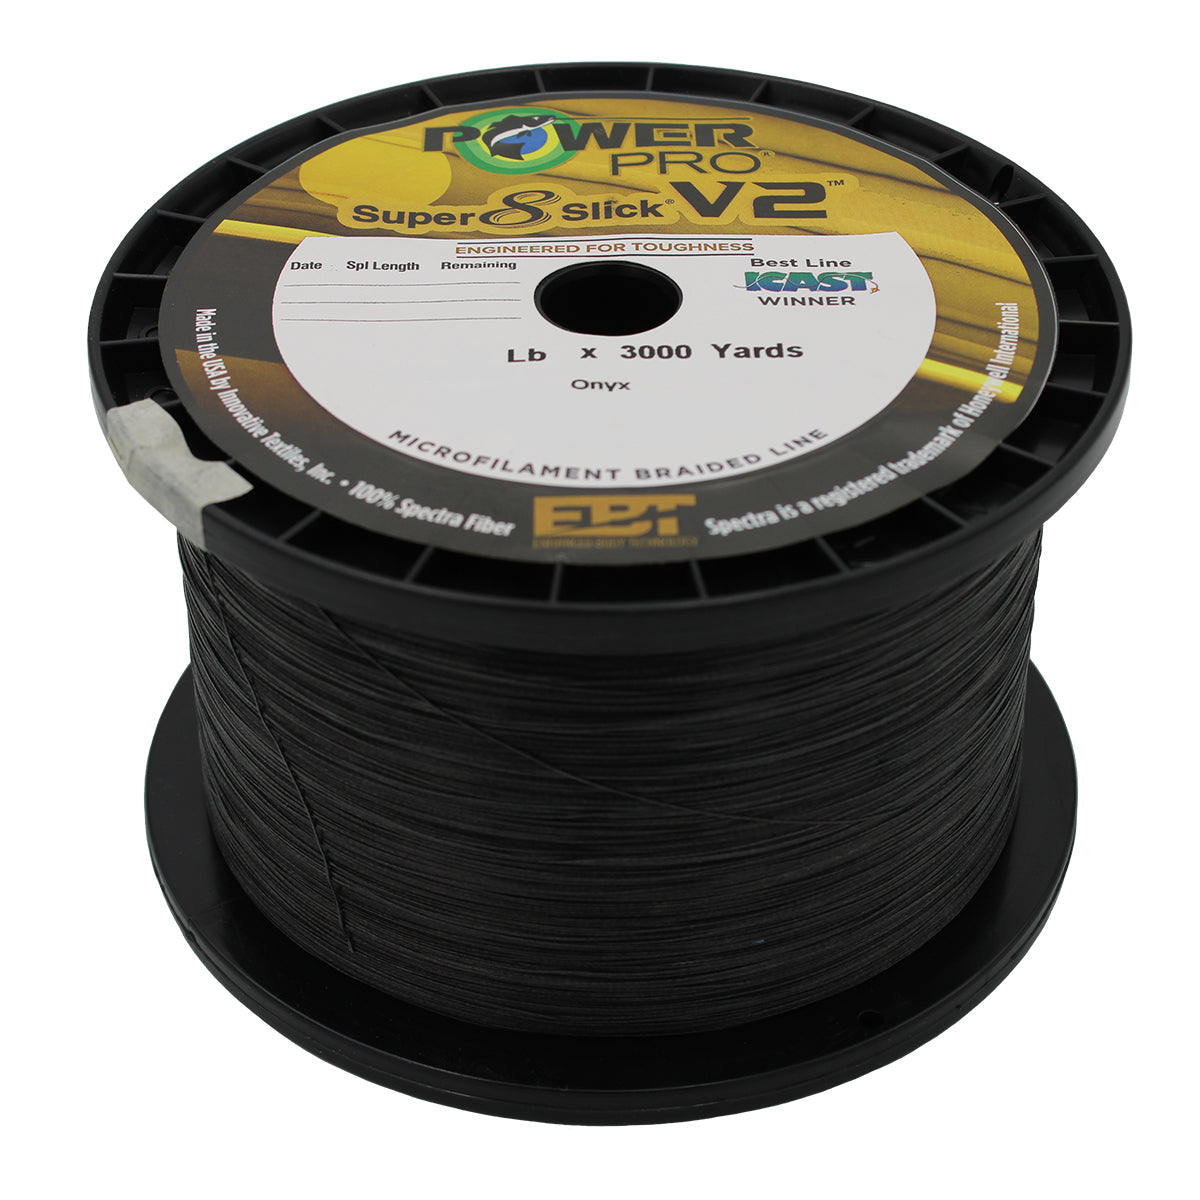 Power Pro Super 8 Slick V2 Braided Line - American Legacy Fishing, G Loomis  Superstore